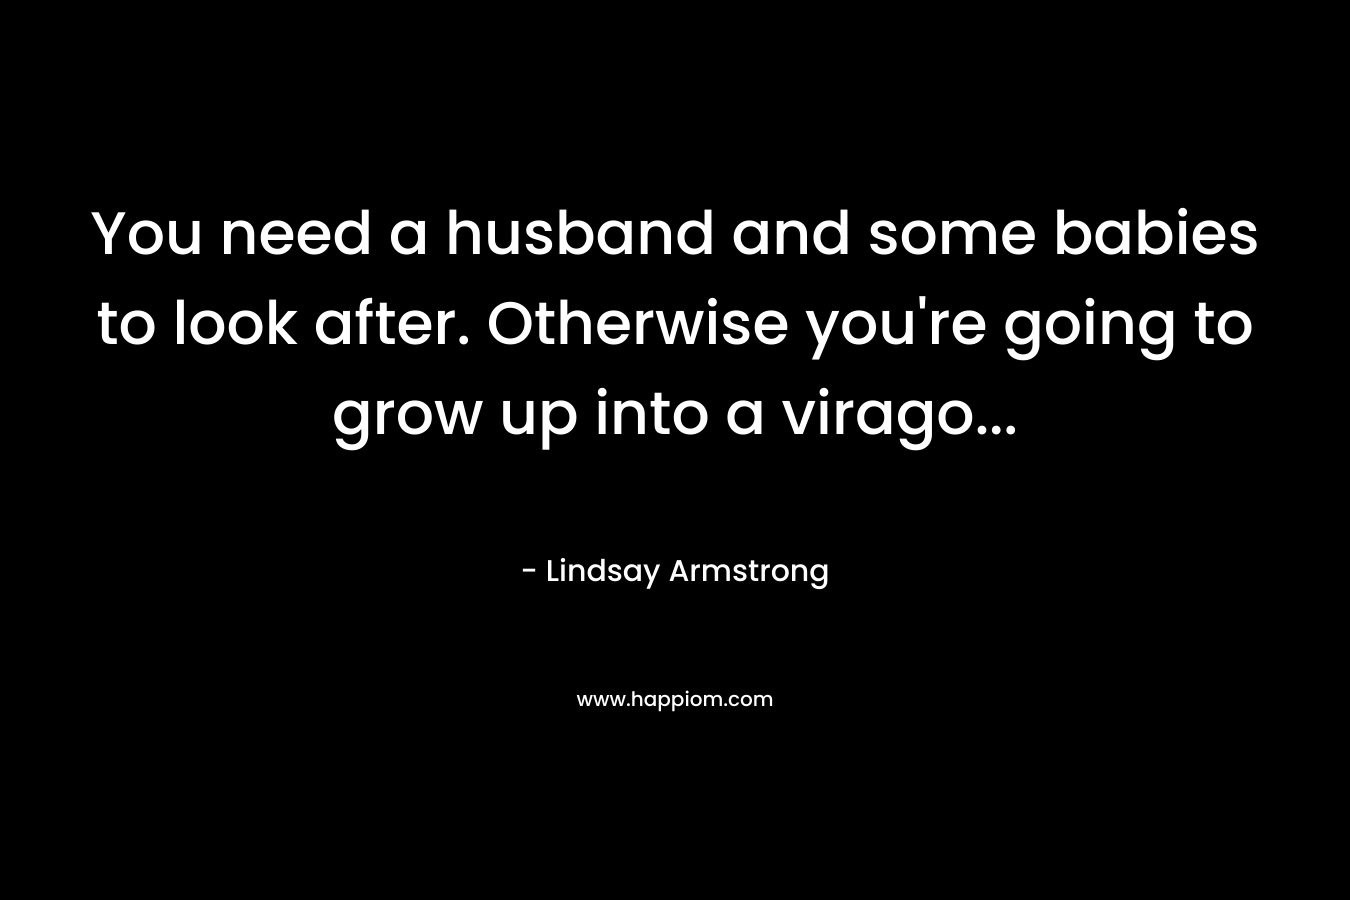 You need a husband and some babies to look after. Otherwise you're going to grow up into a virago...